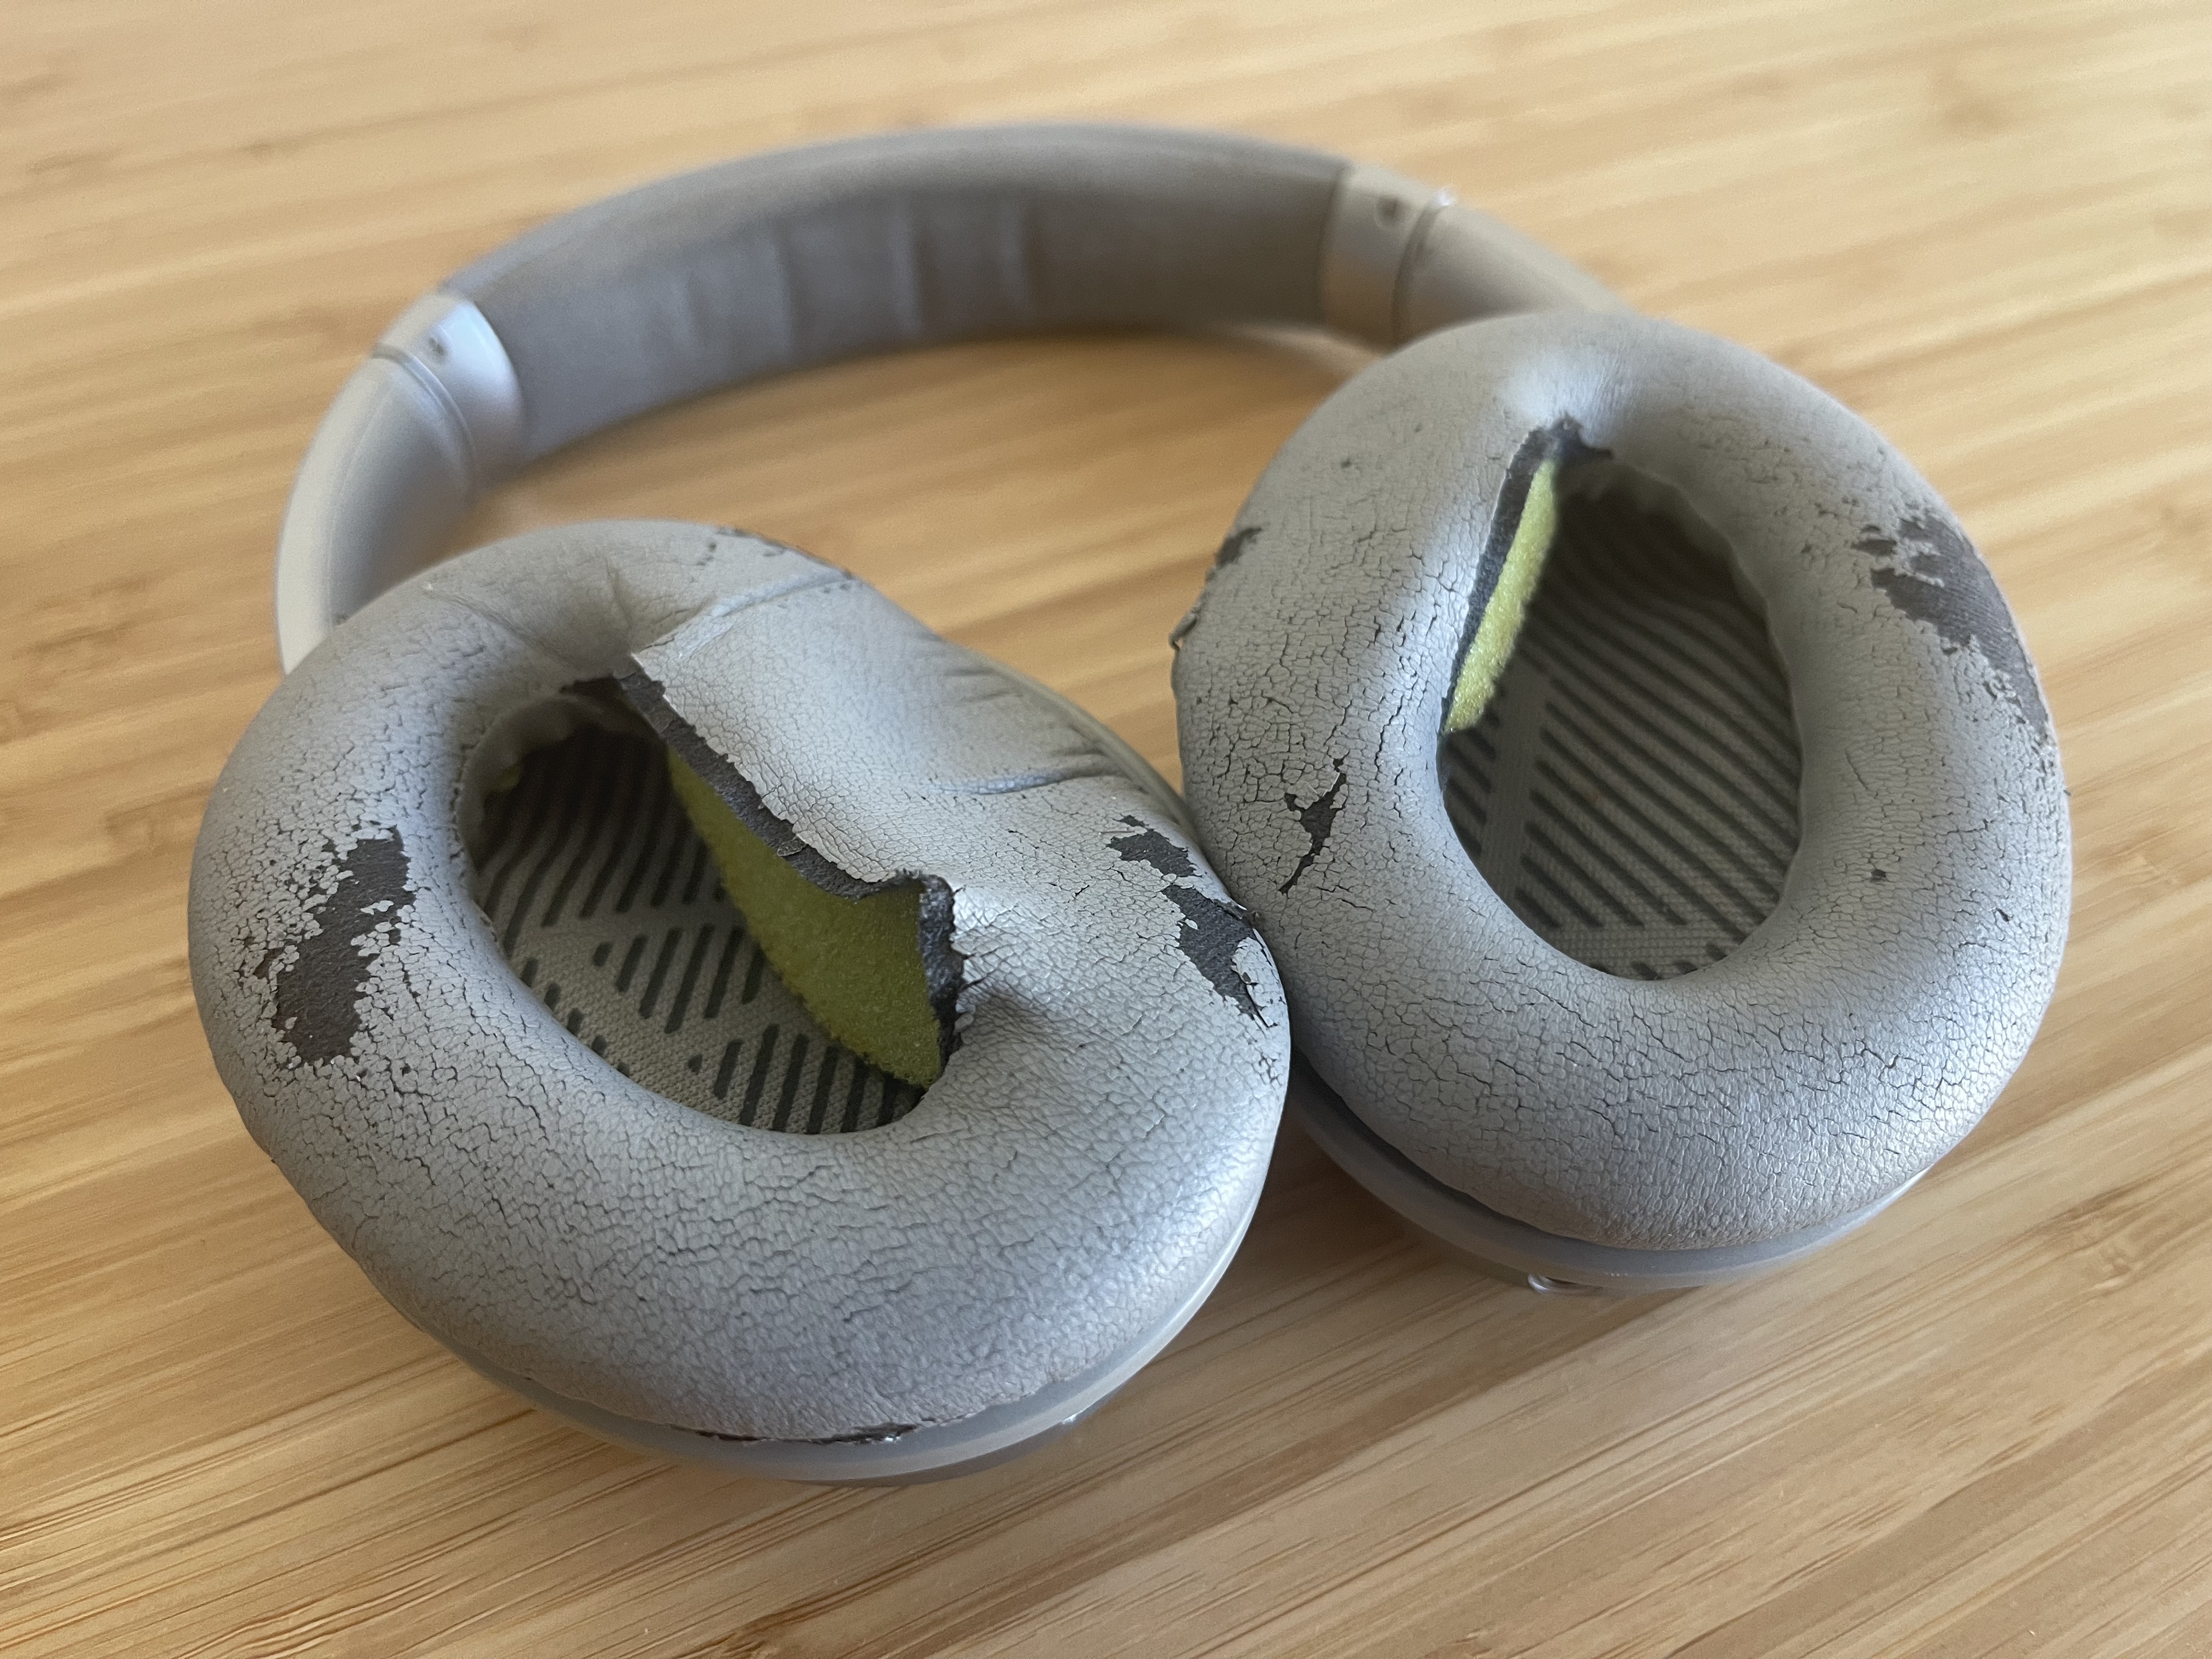 QC35 replacement pads: Cushions ear pads review